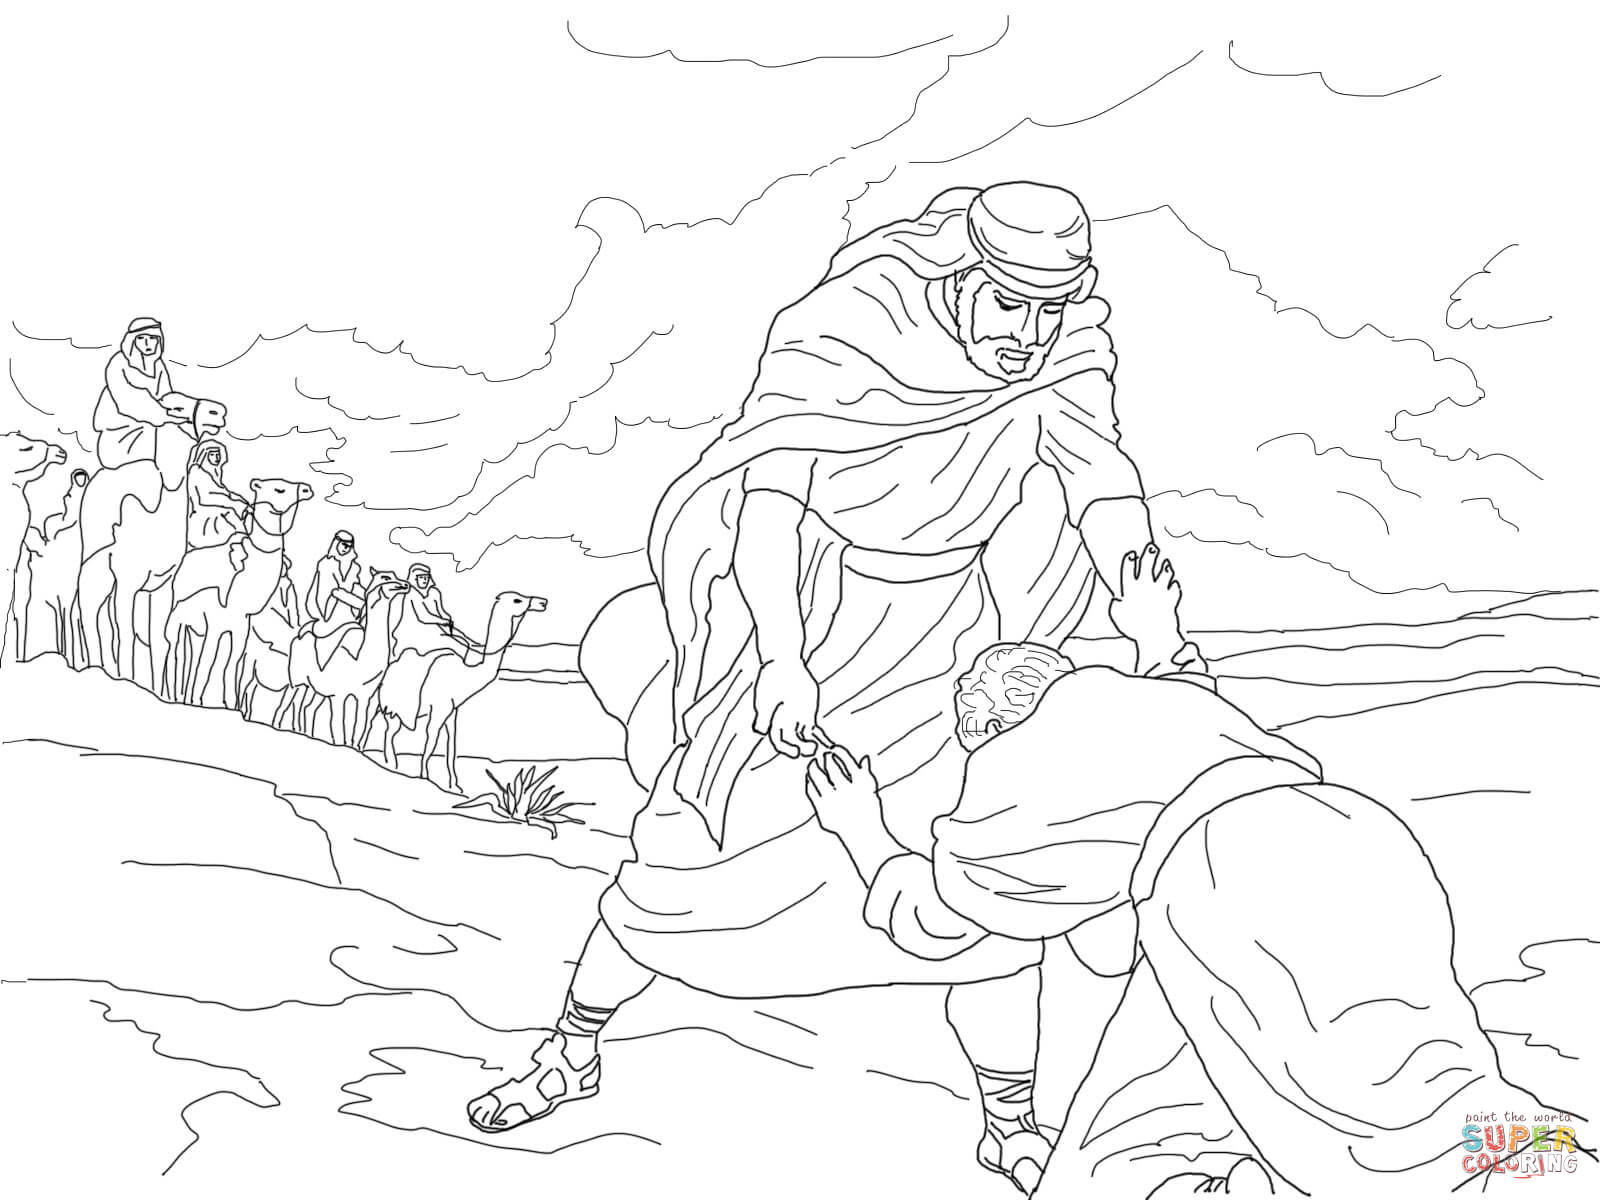 Esau forgives jacob coloring page free printable coloring pages